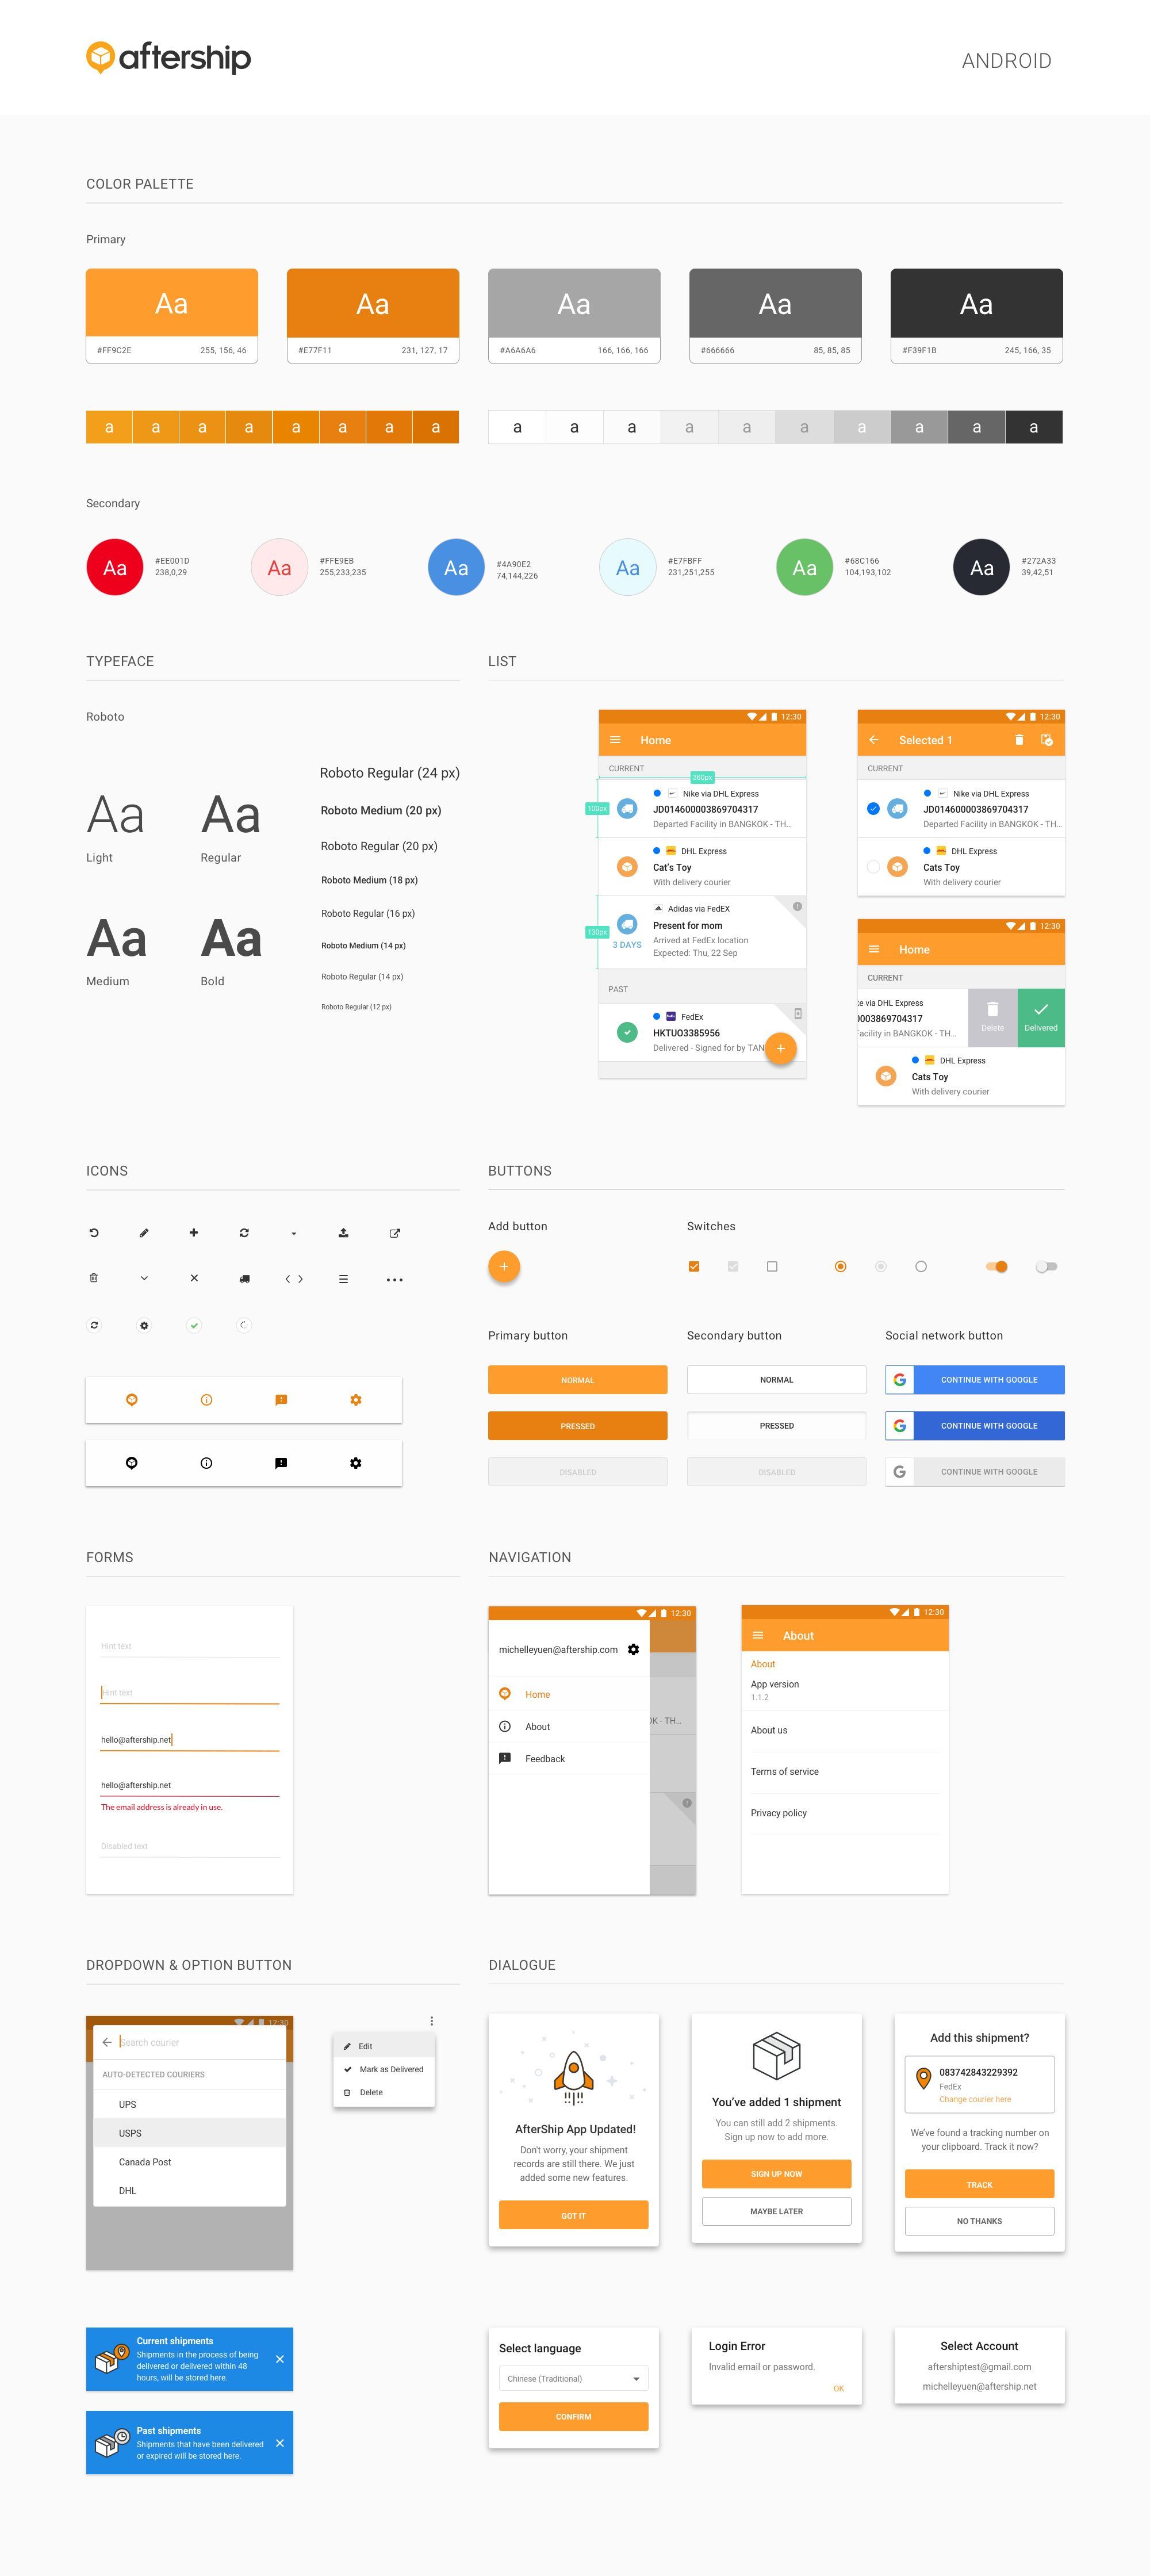 aftership_android_app_ui_style_guide.jpg by Michelle Yuen - aftership_android_app_ui_style_guide.jpg by Michelle Yuen -   19 style Guides book ideas